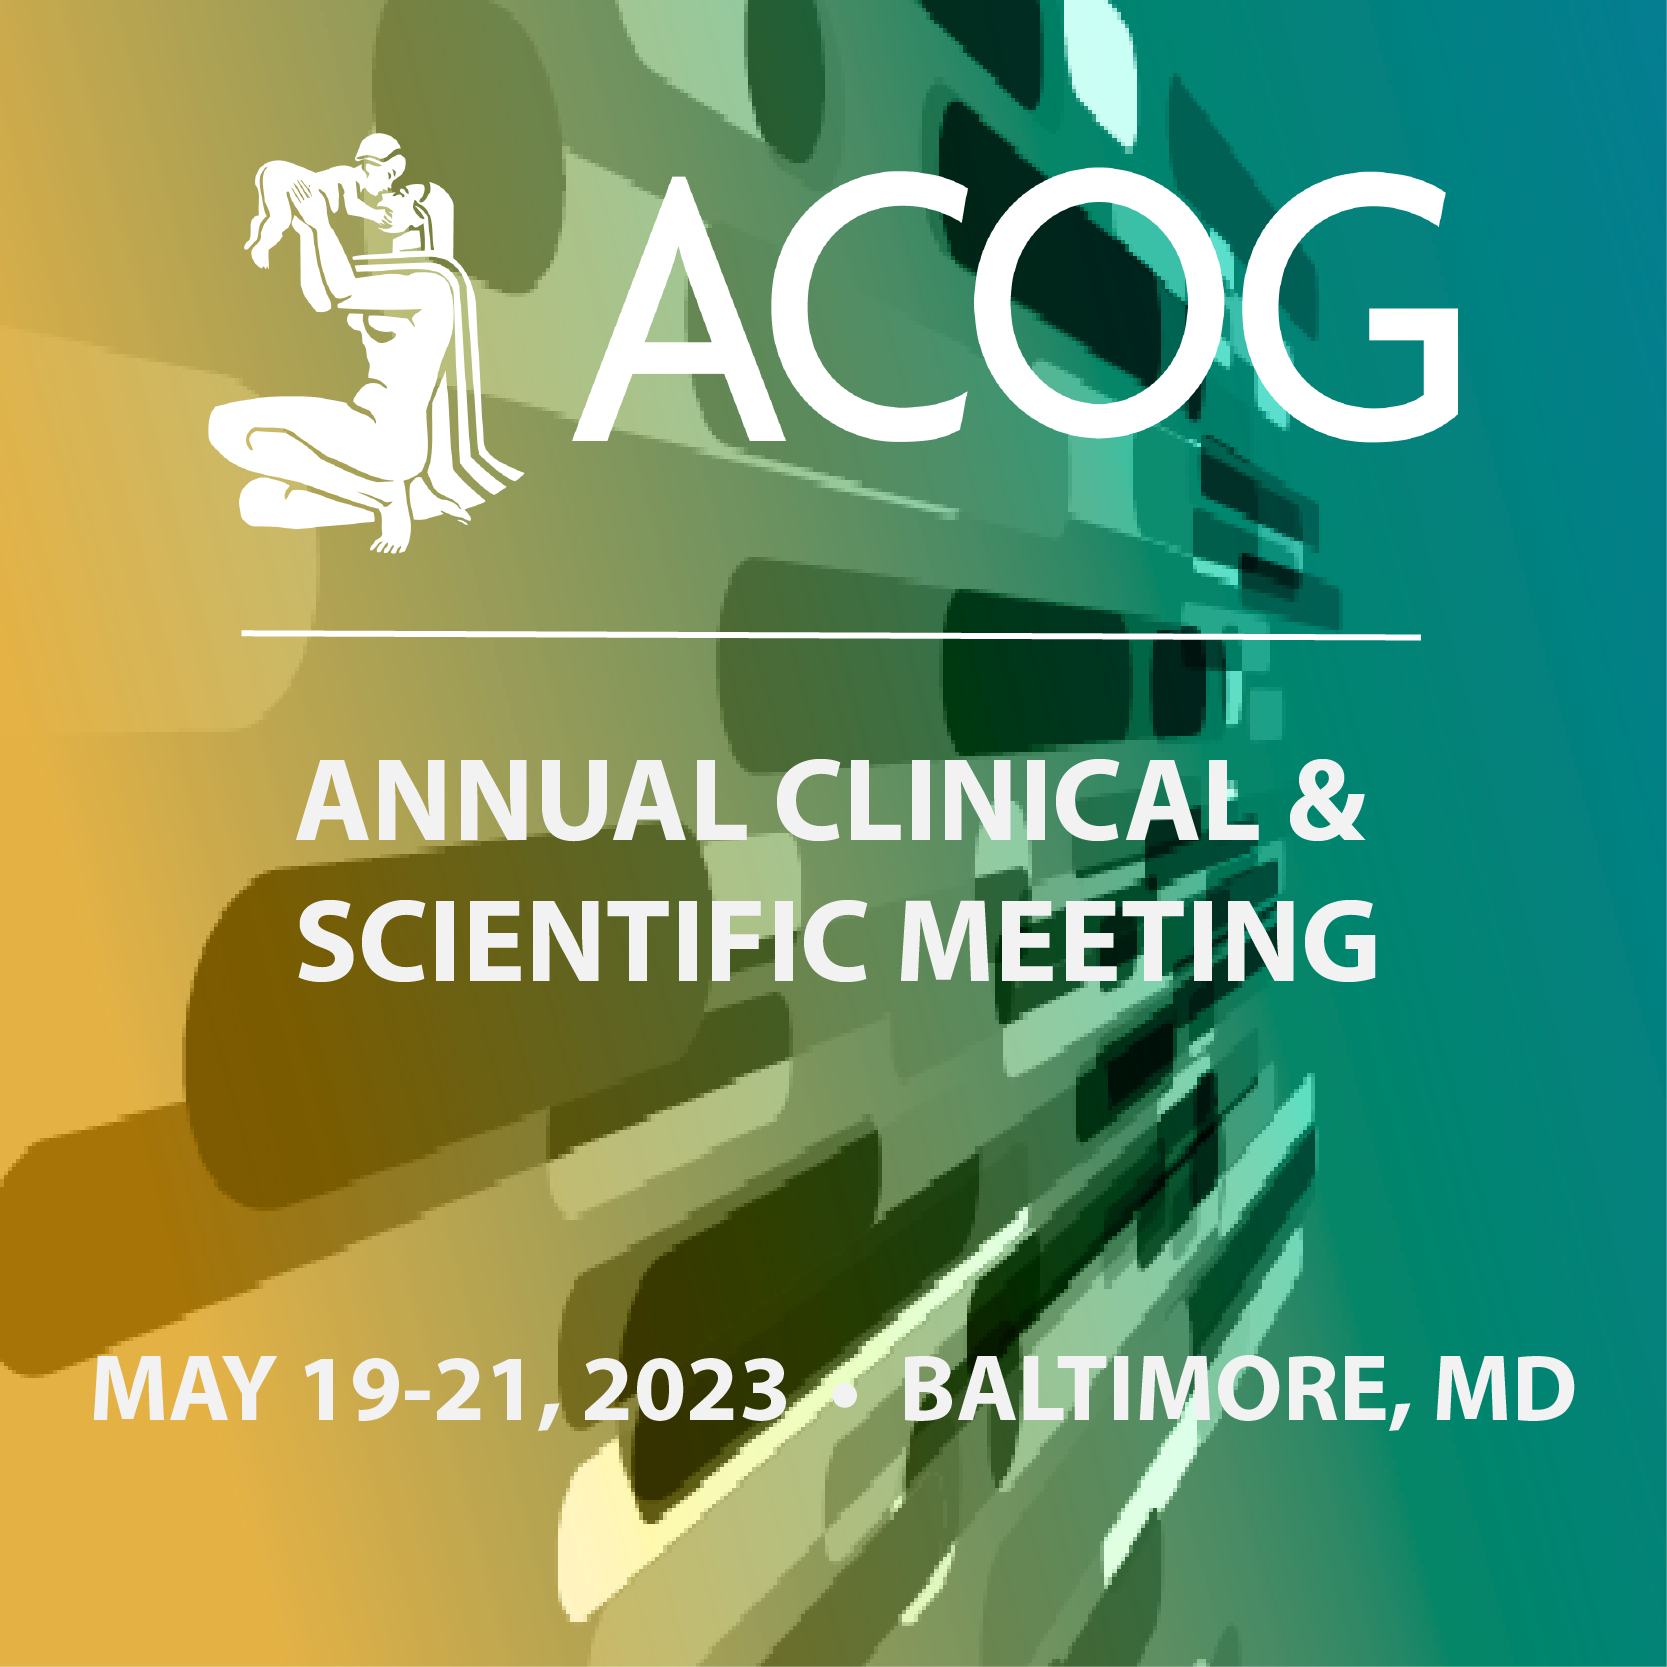 American College of Obstetricians and Gynecologists Annual Clinical & Scientific Meeting - ACOG 2023